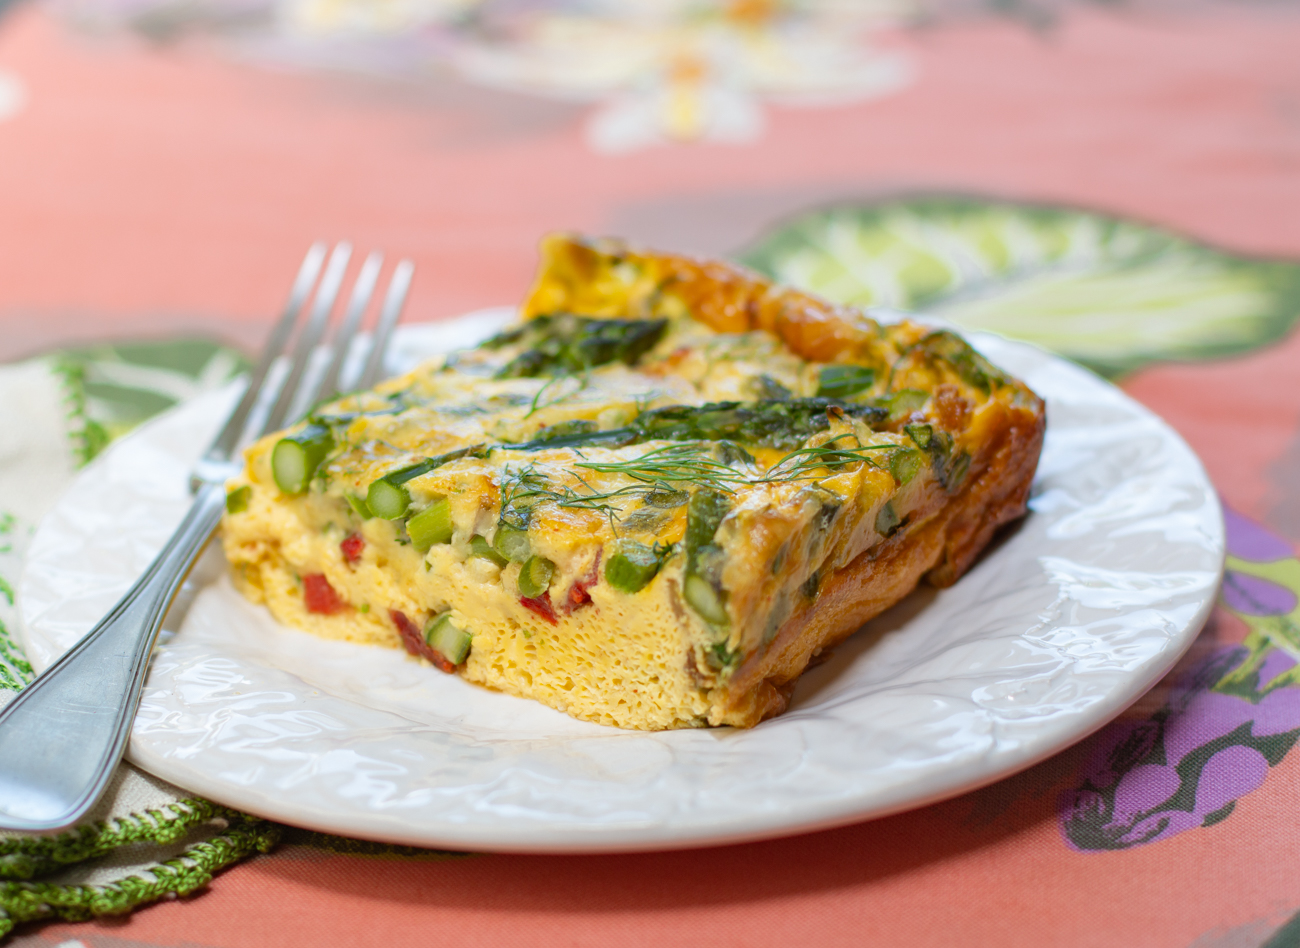 A serving of Asparagus Frittata with Roasted Peppers & Dill